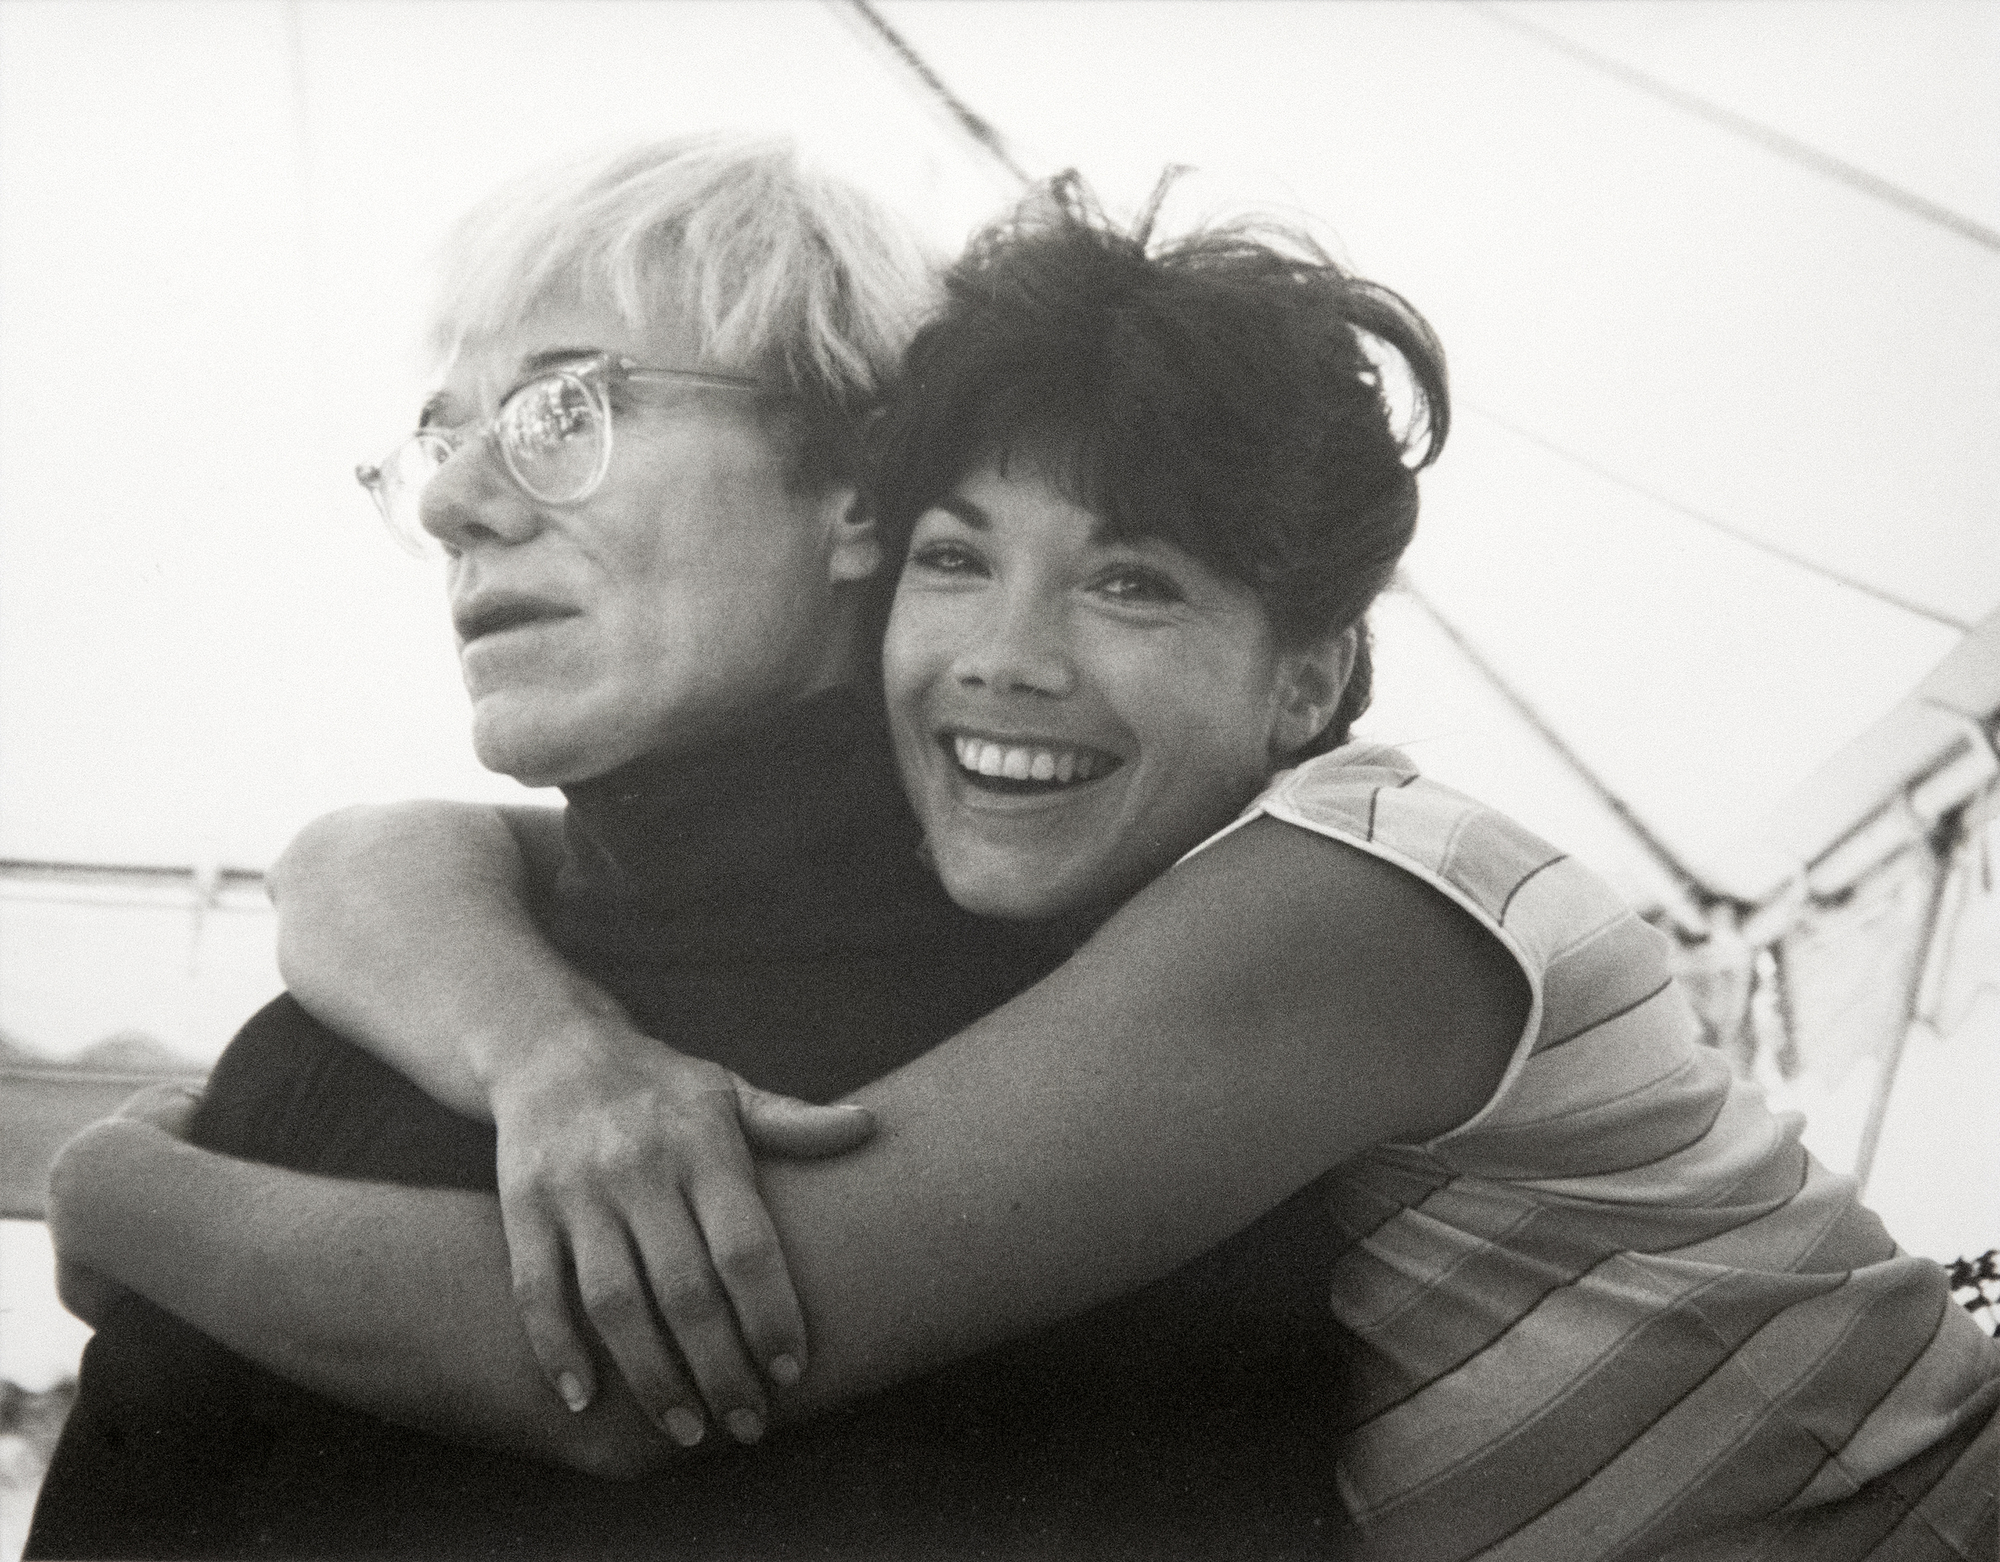 ANDY WARHOL - Andy and Barbi Benton - unique silver gelatin print - 8 x 10 in.